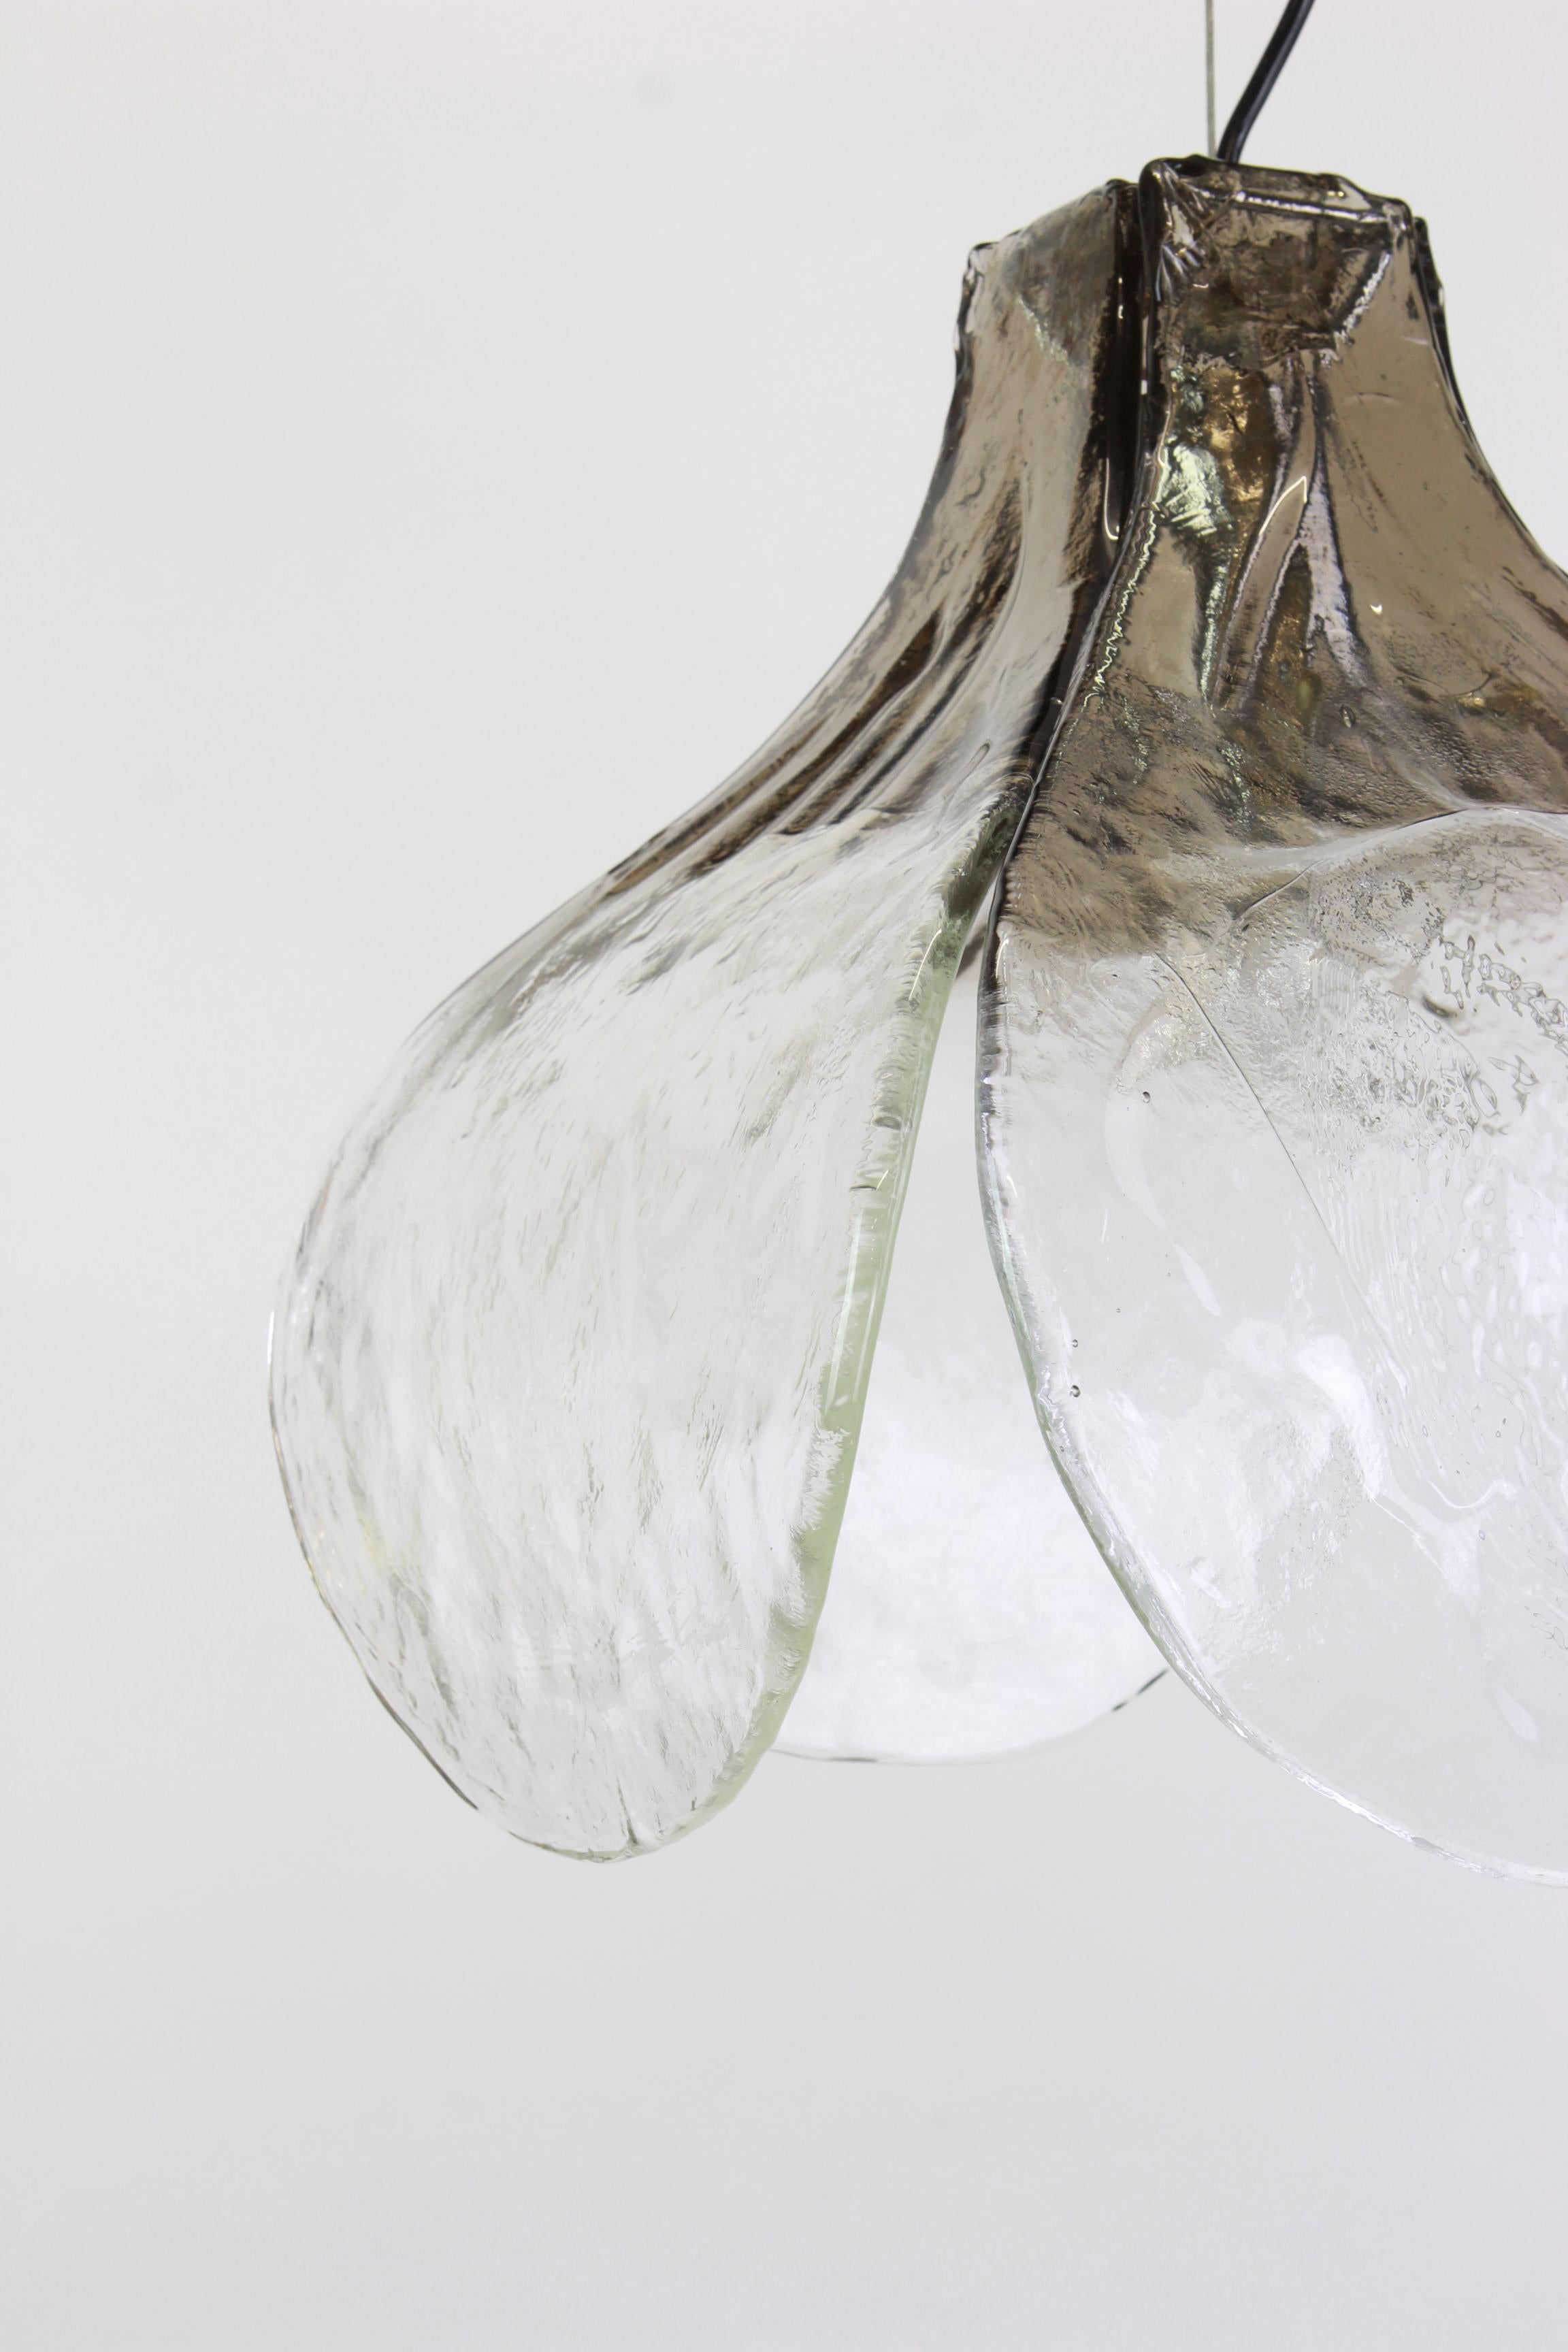 Murano pendant light designed by Carlo Nason for Mazzega, 1970s

A wonderful floral pendant light with four large hand blown clear and smoked Murano glass petals which are supported by a metal frame, designed by Carlo Nason for Mazzega,